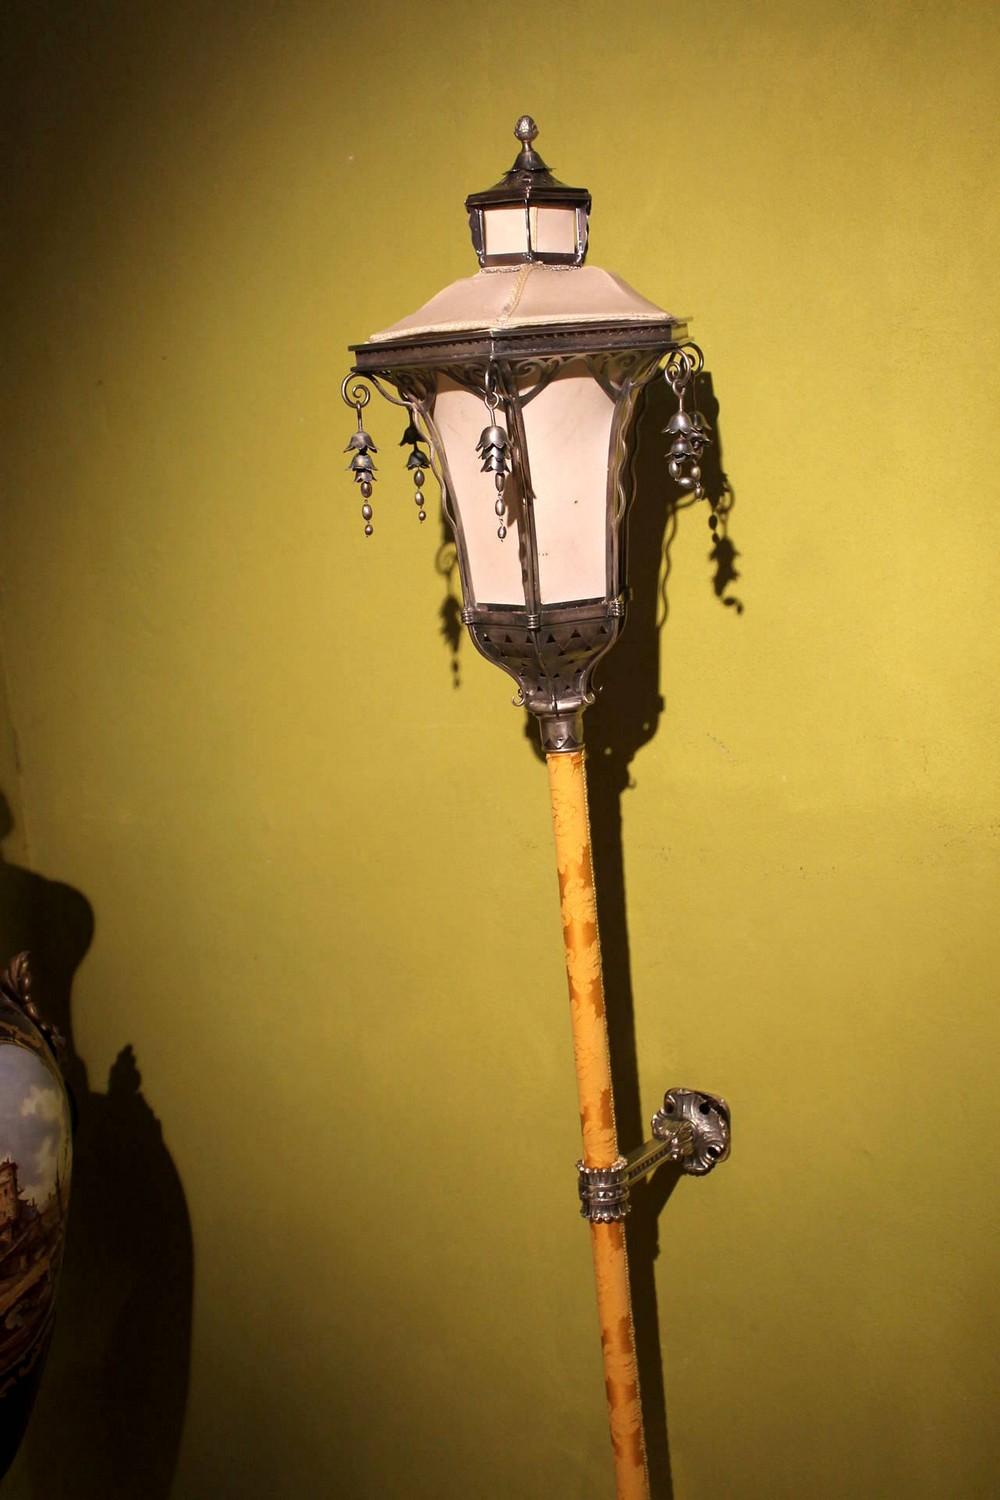 This Italian whismical silvered metal handcrafted wall-mounted lantern or sconce feature an open worked pagoda lidded lampshade embellished with scrolls and pendants in the form of flowers. The lower part of the lamp has pierced geometrical patterns